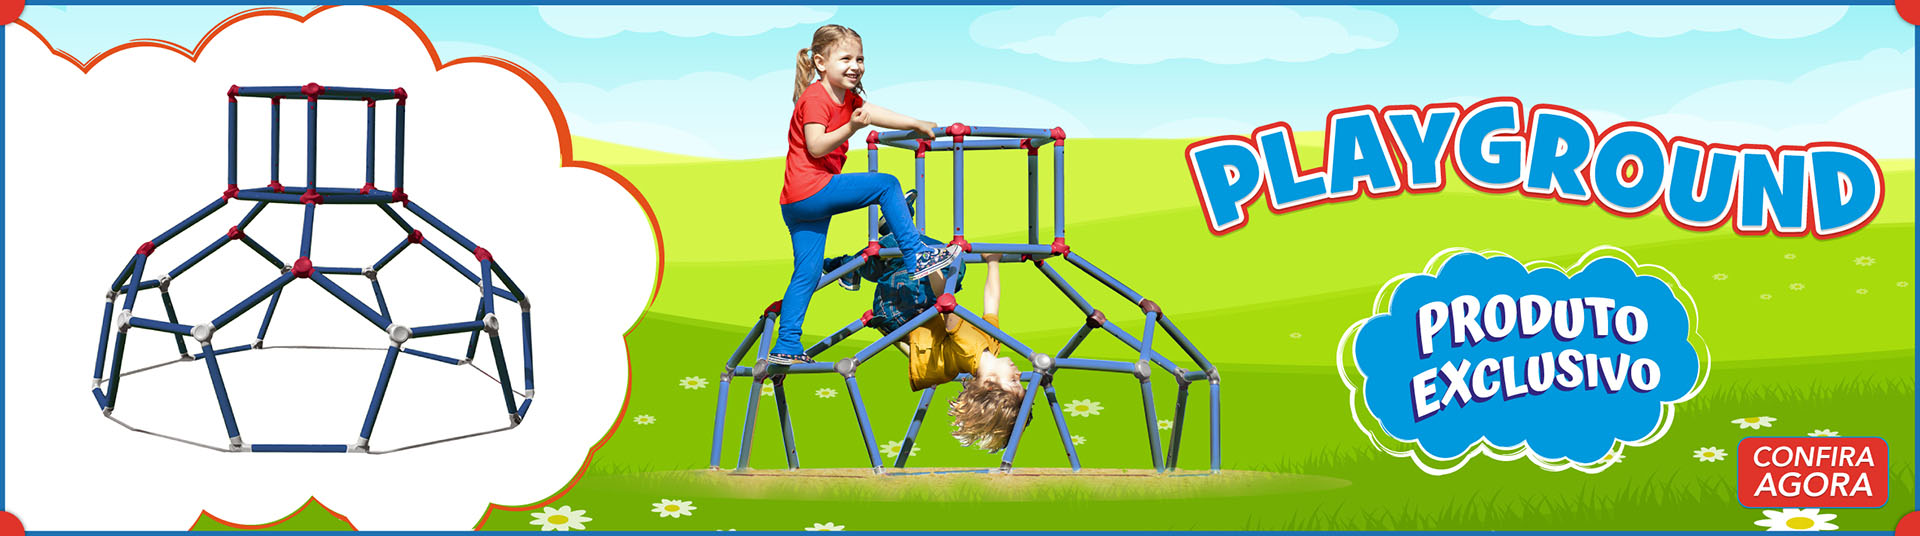 BANNER PLAY DOME CLIMBER